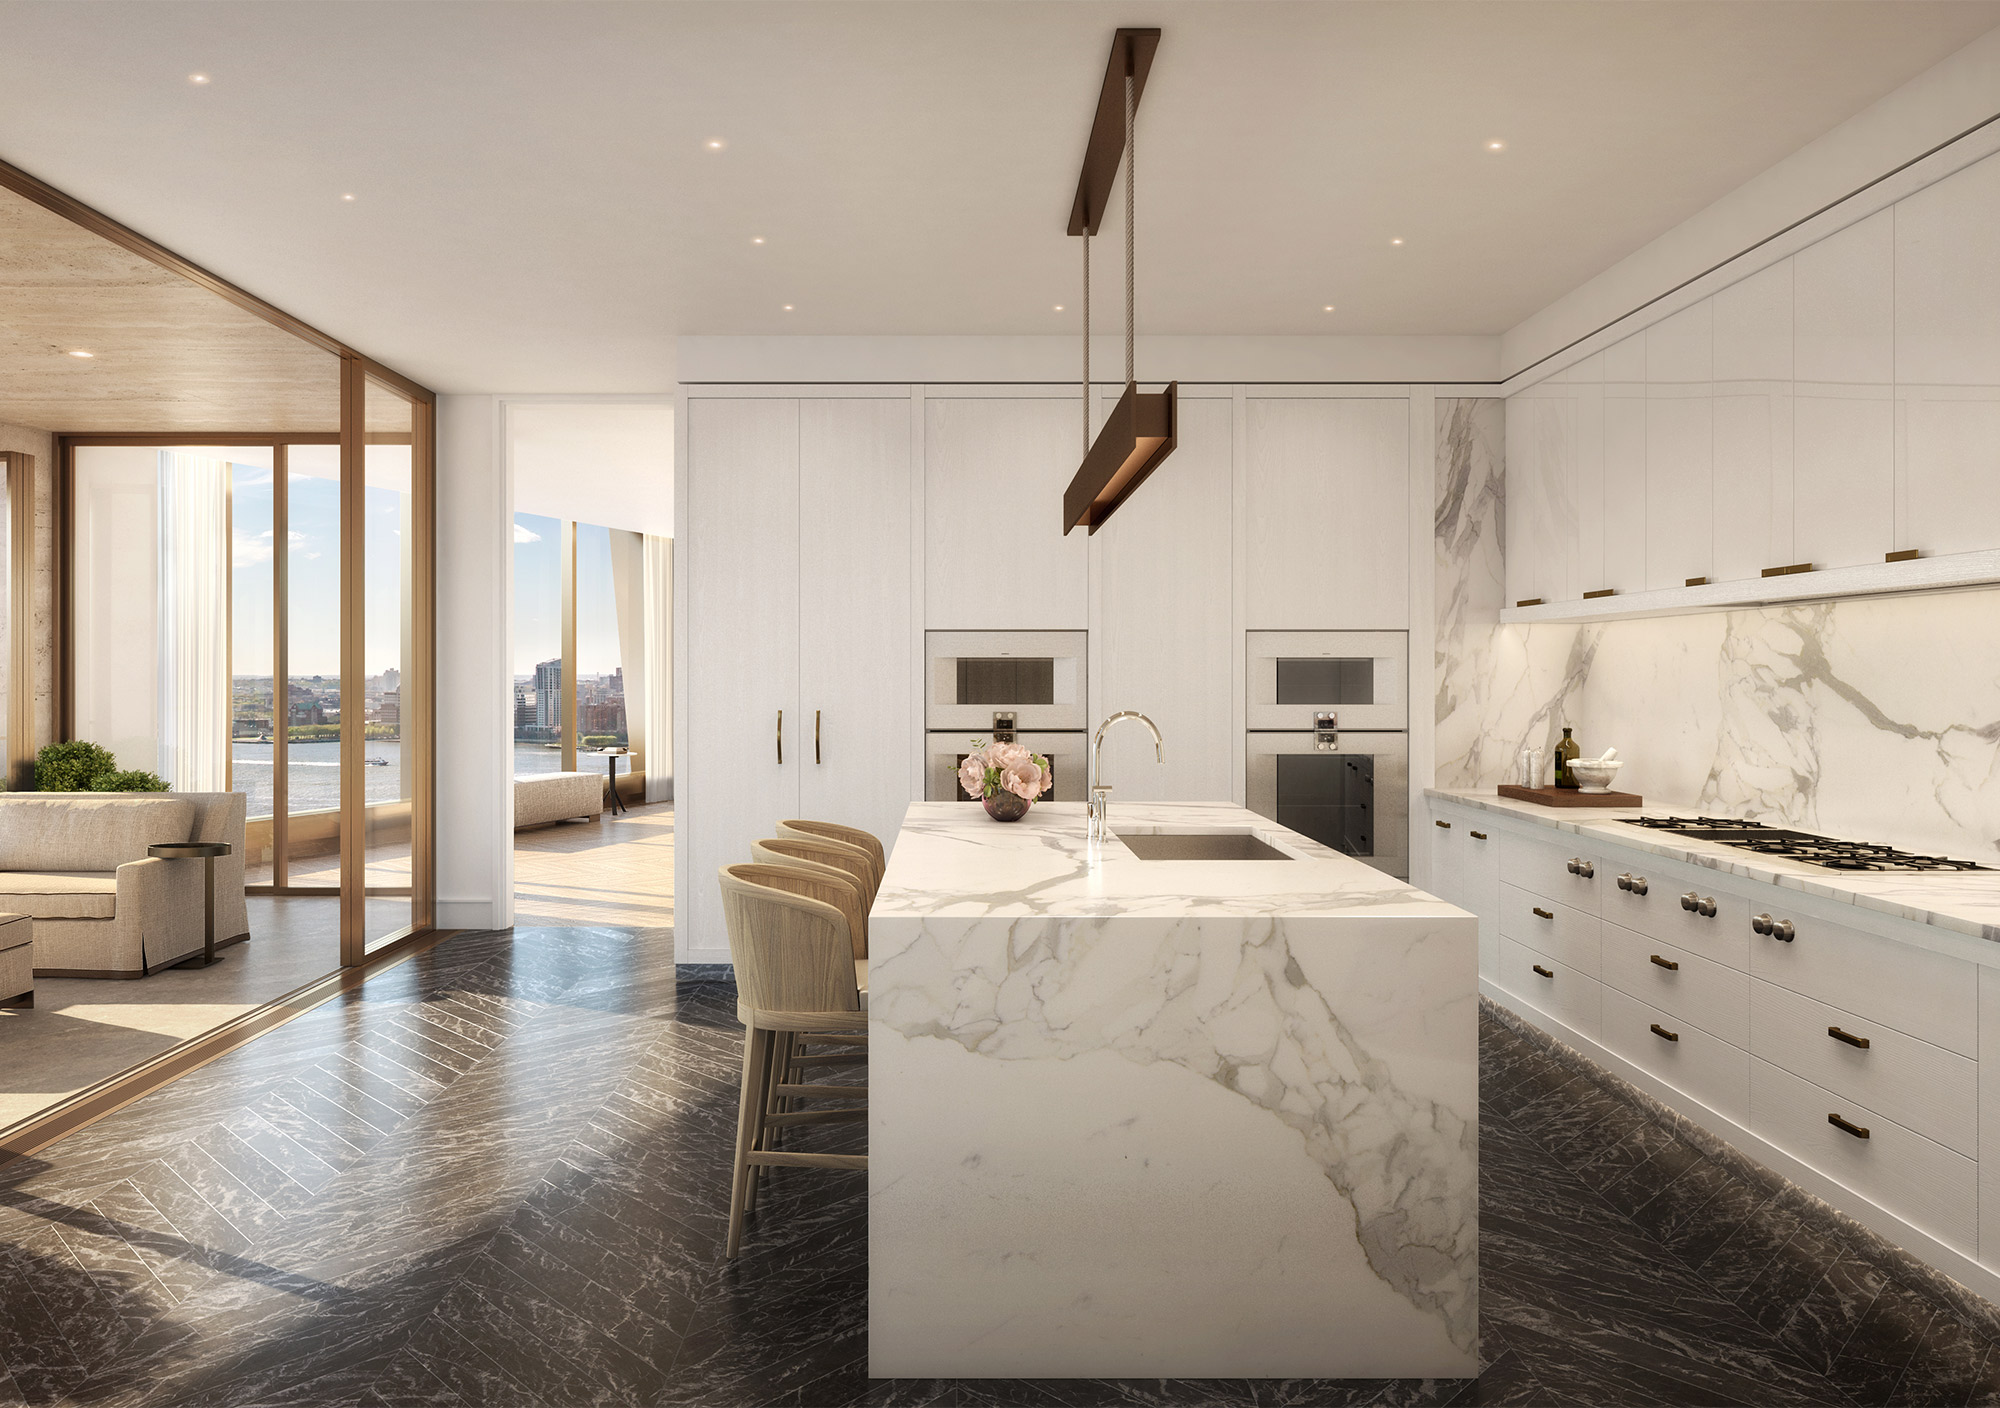 Luxurious kitchen with marble kitchen island and walls